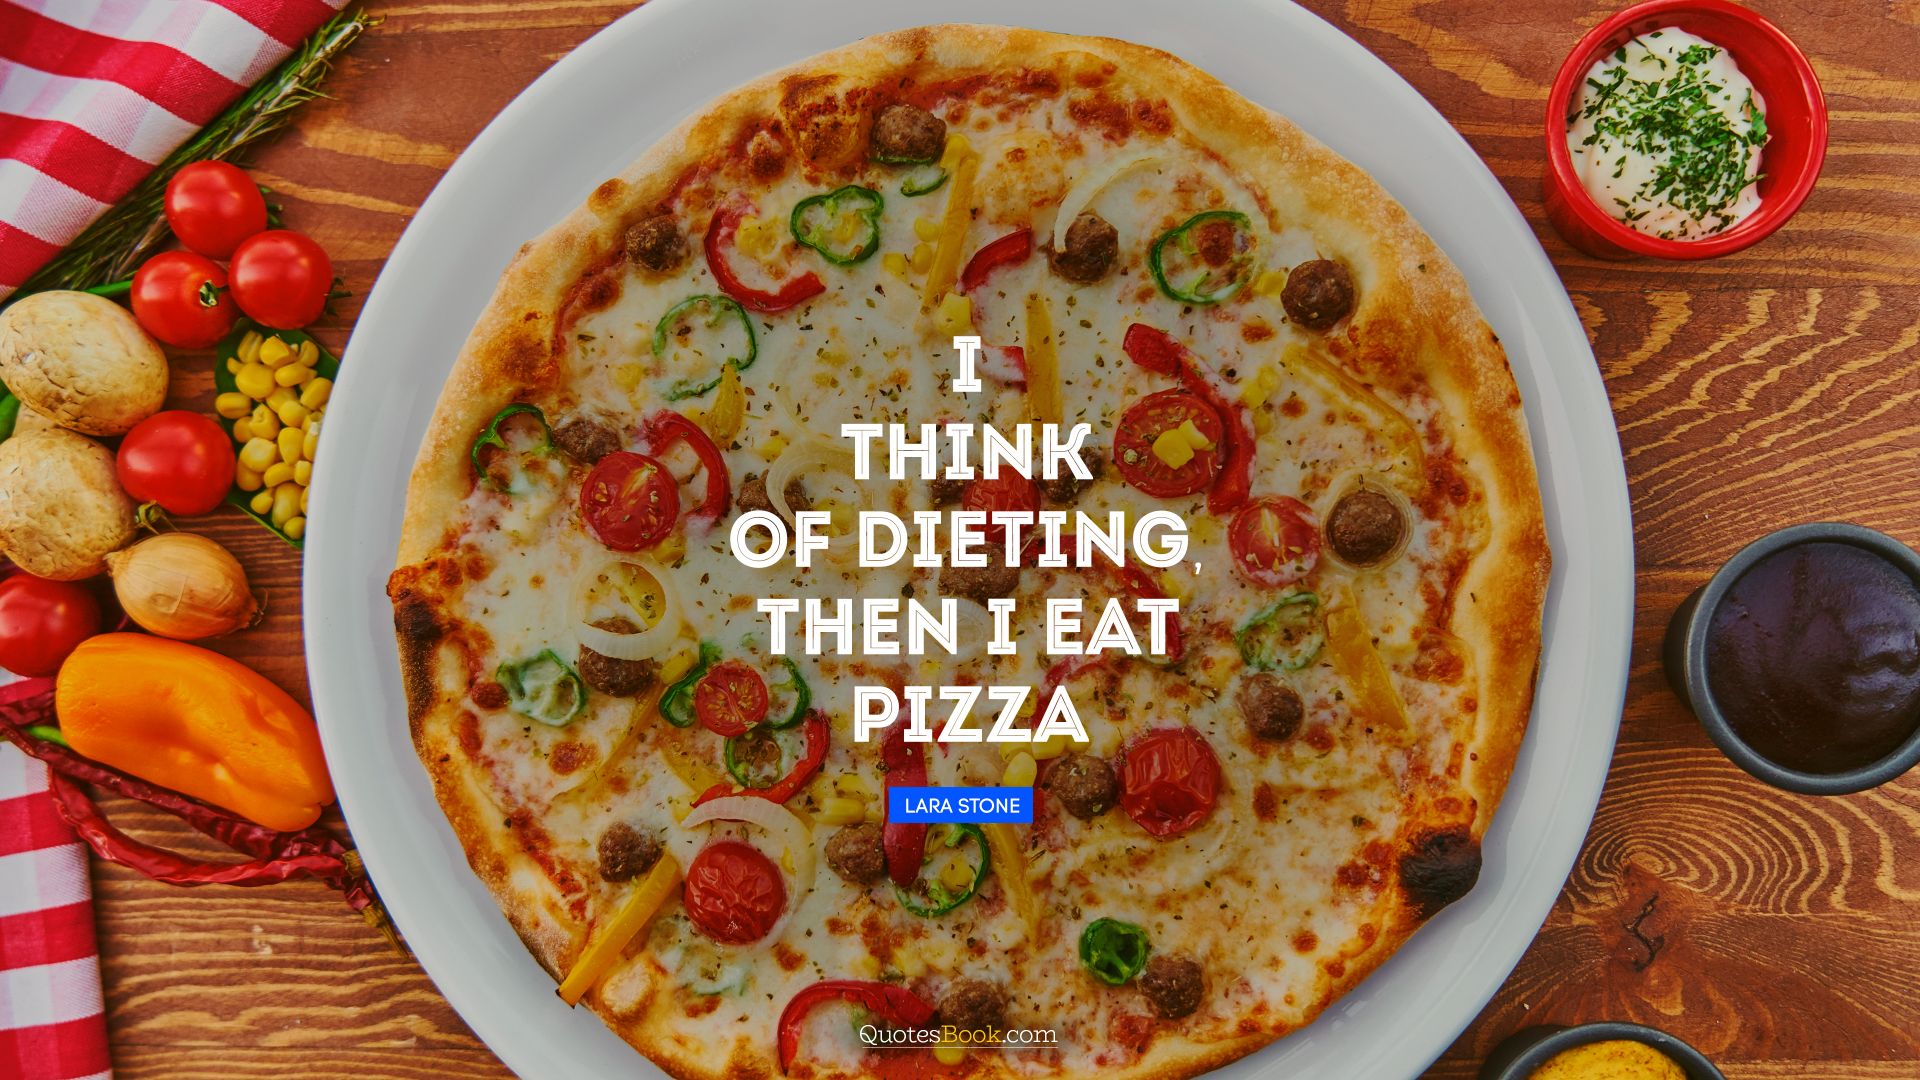 I think of dieting, then I eat pizza. - Quote by Lara Stone